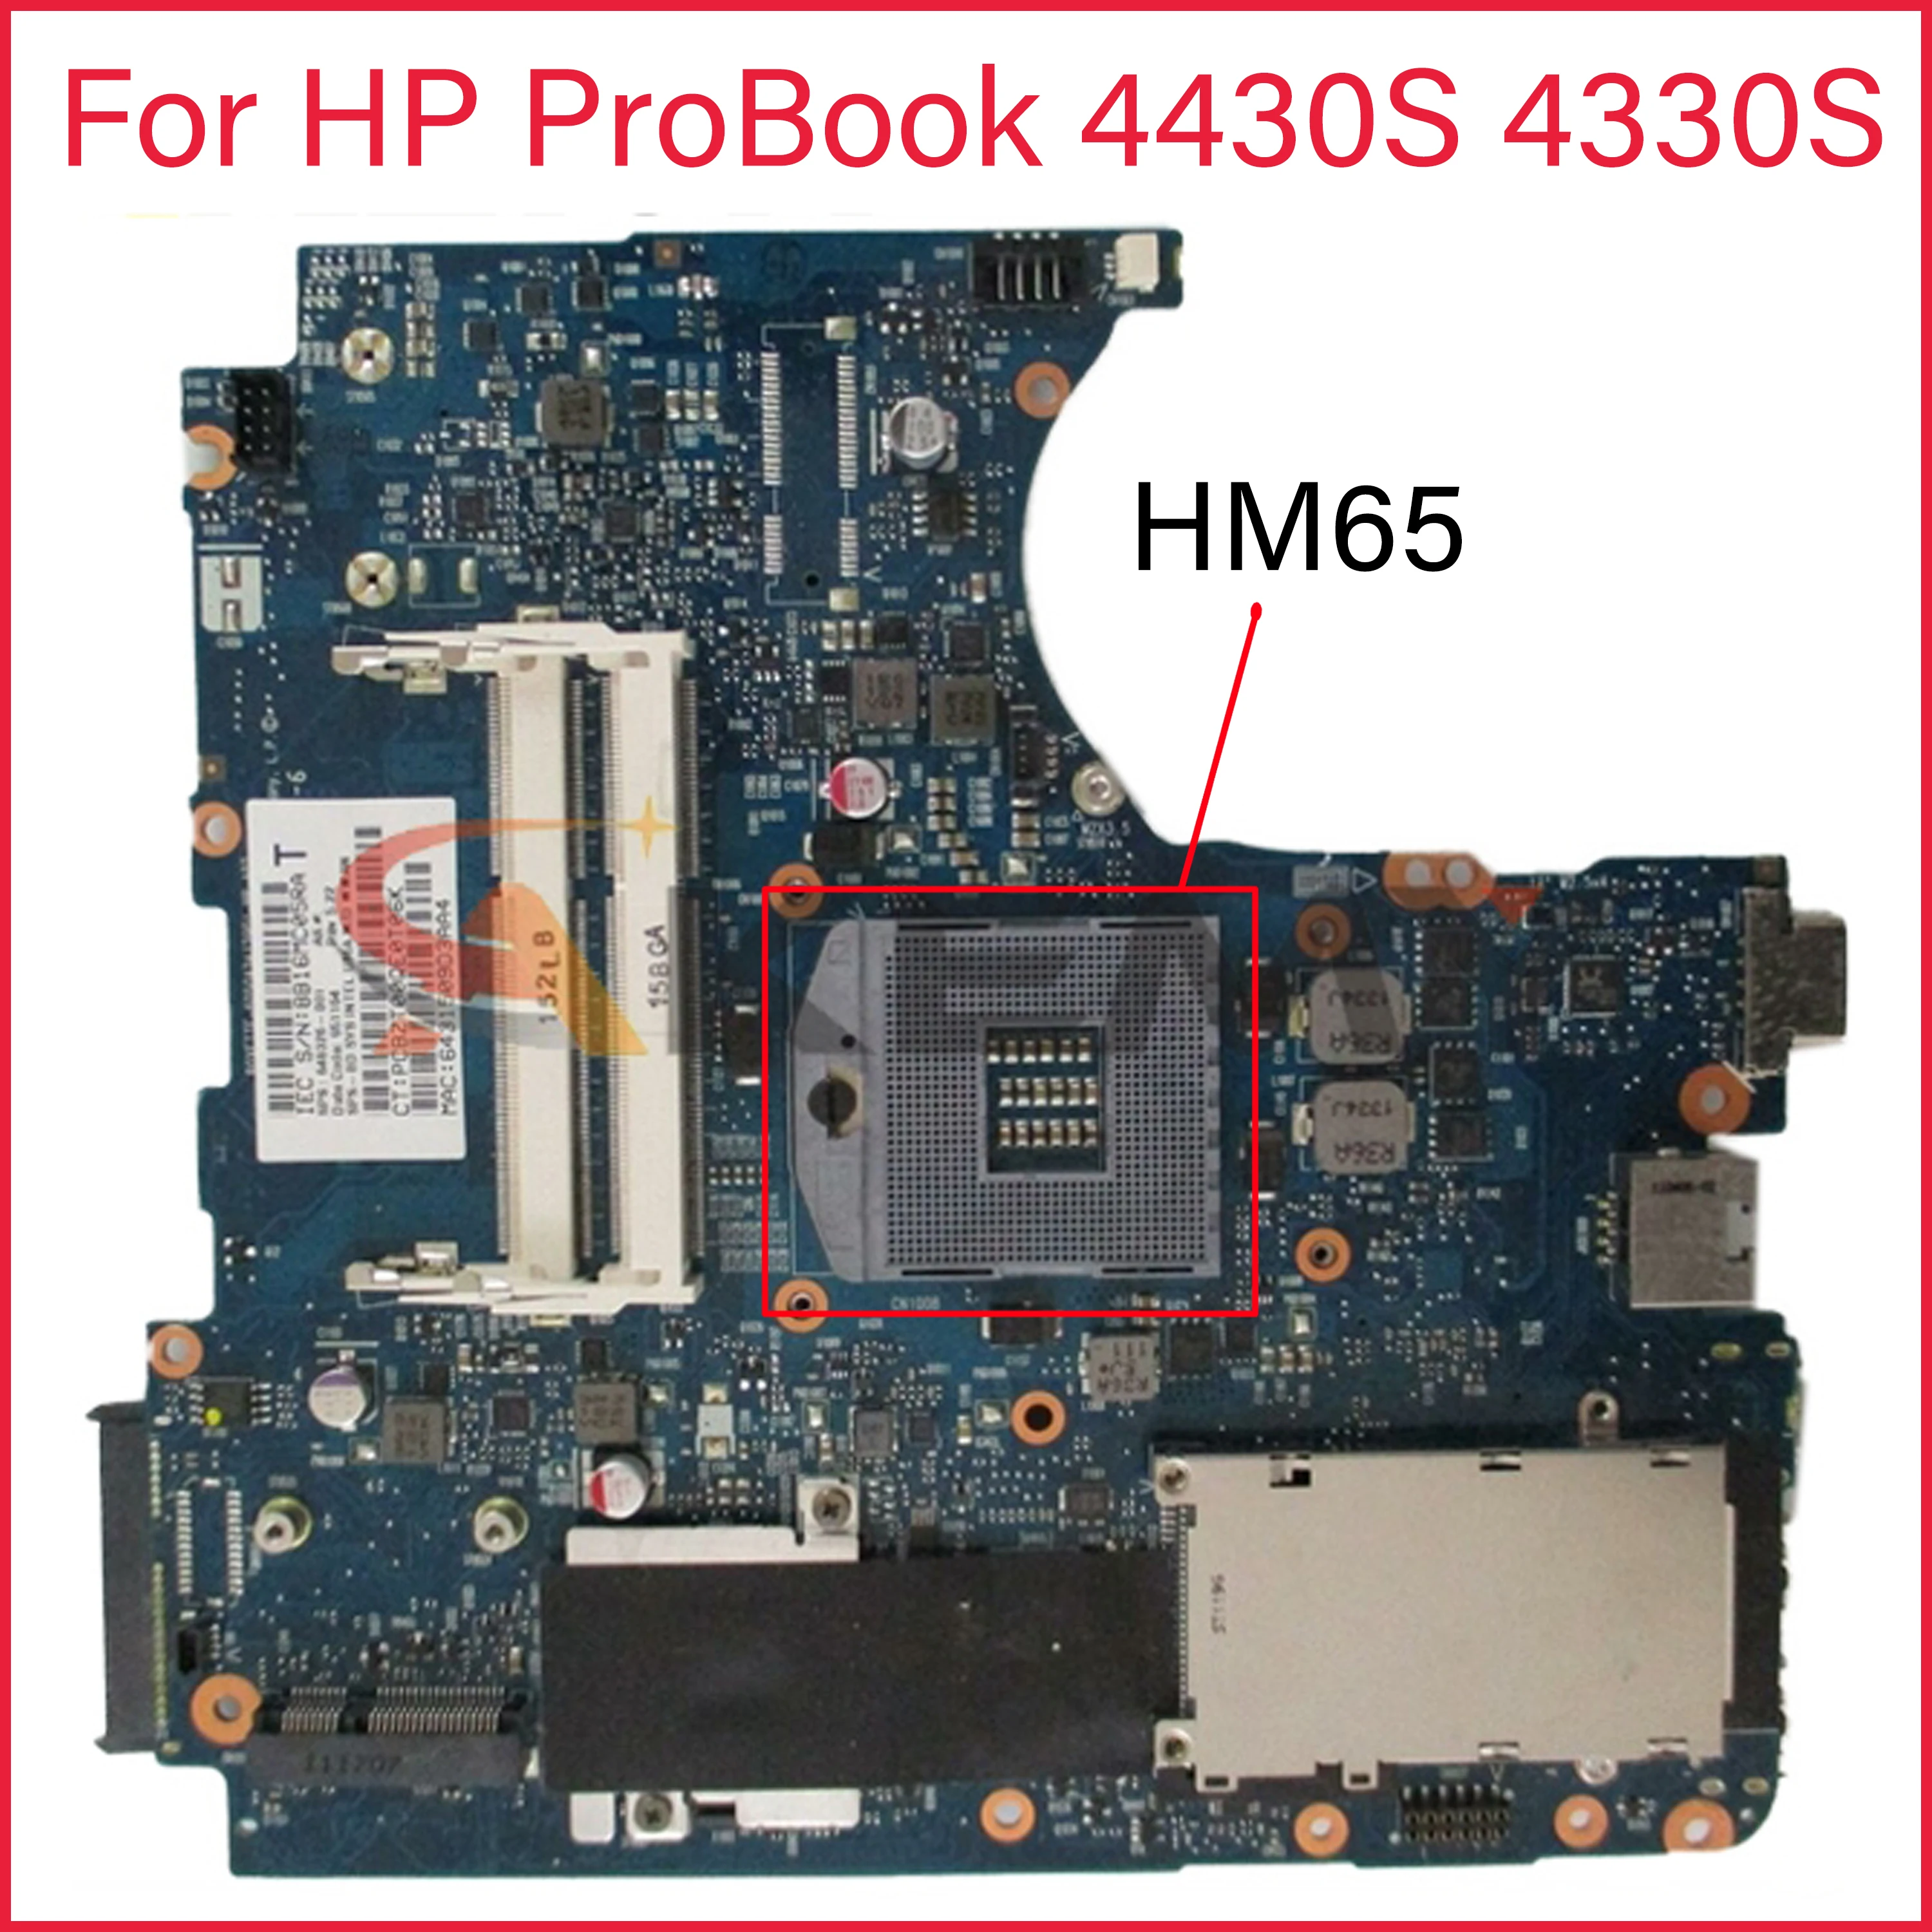 

For HP 4430S 4330S Laptop motherboard 6050A2465101-MB-A02 658333-001 658333-501 Hm65 100% full Tested